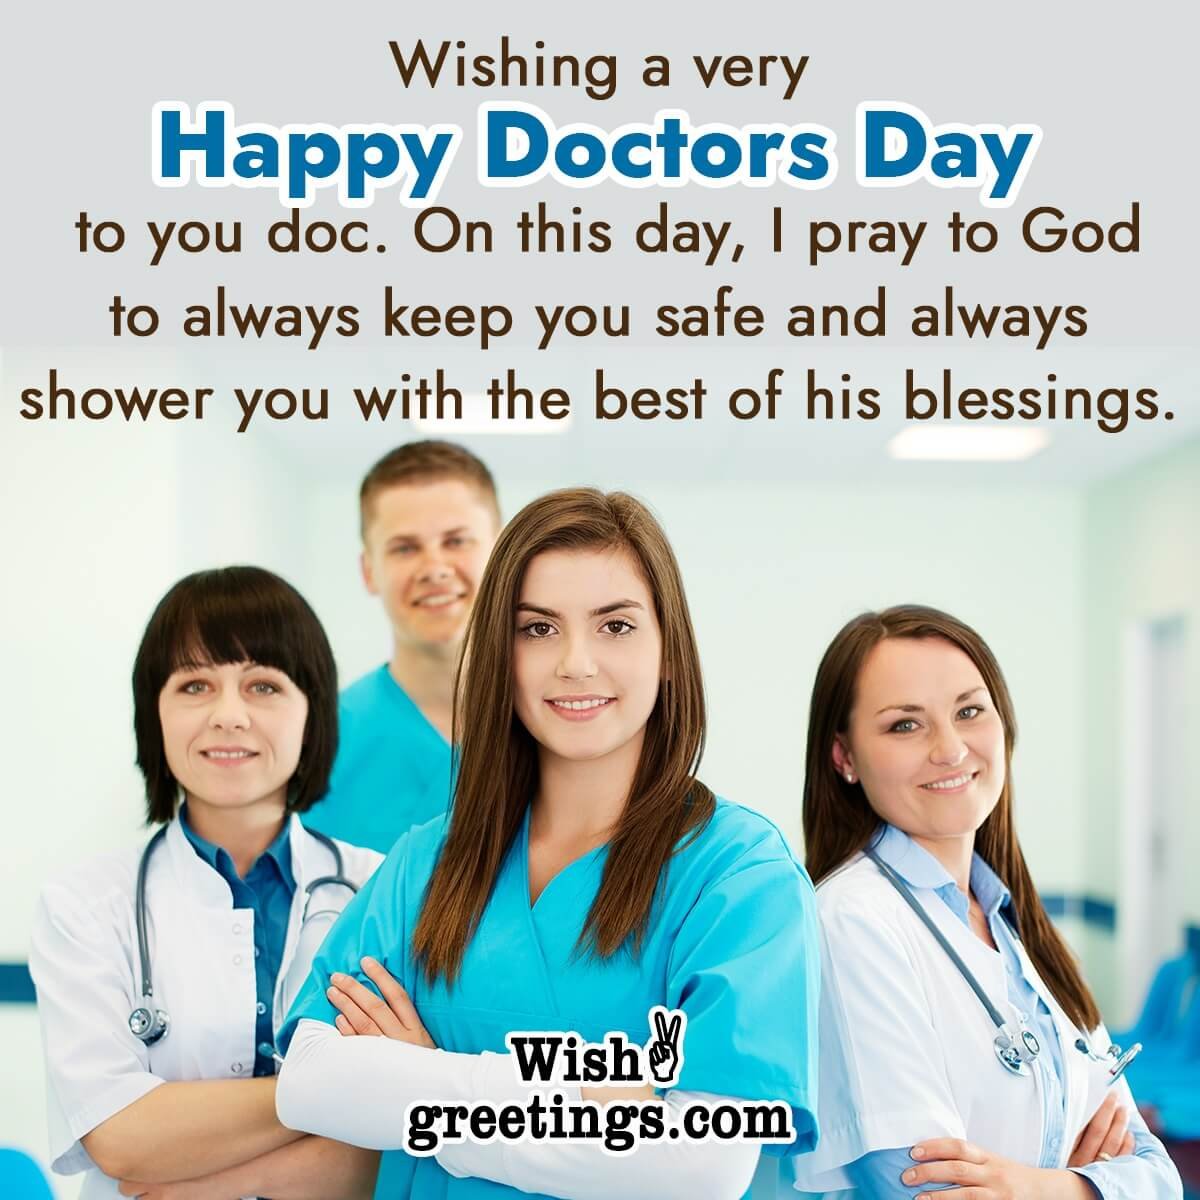 Wishing A Very Happy Doctors Day